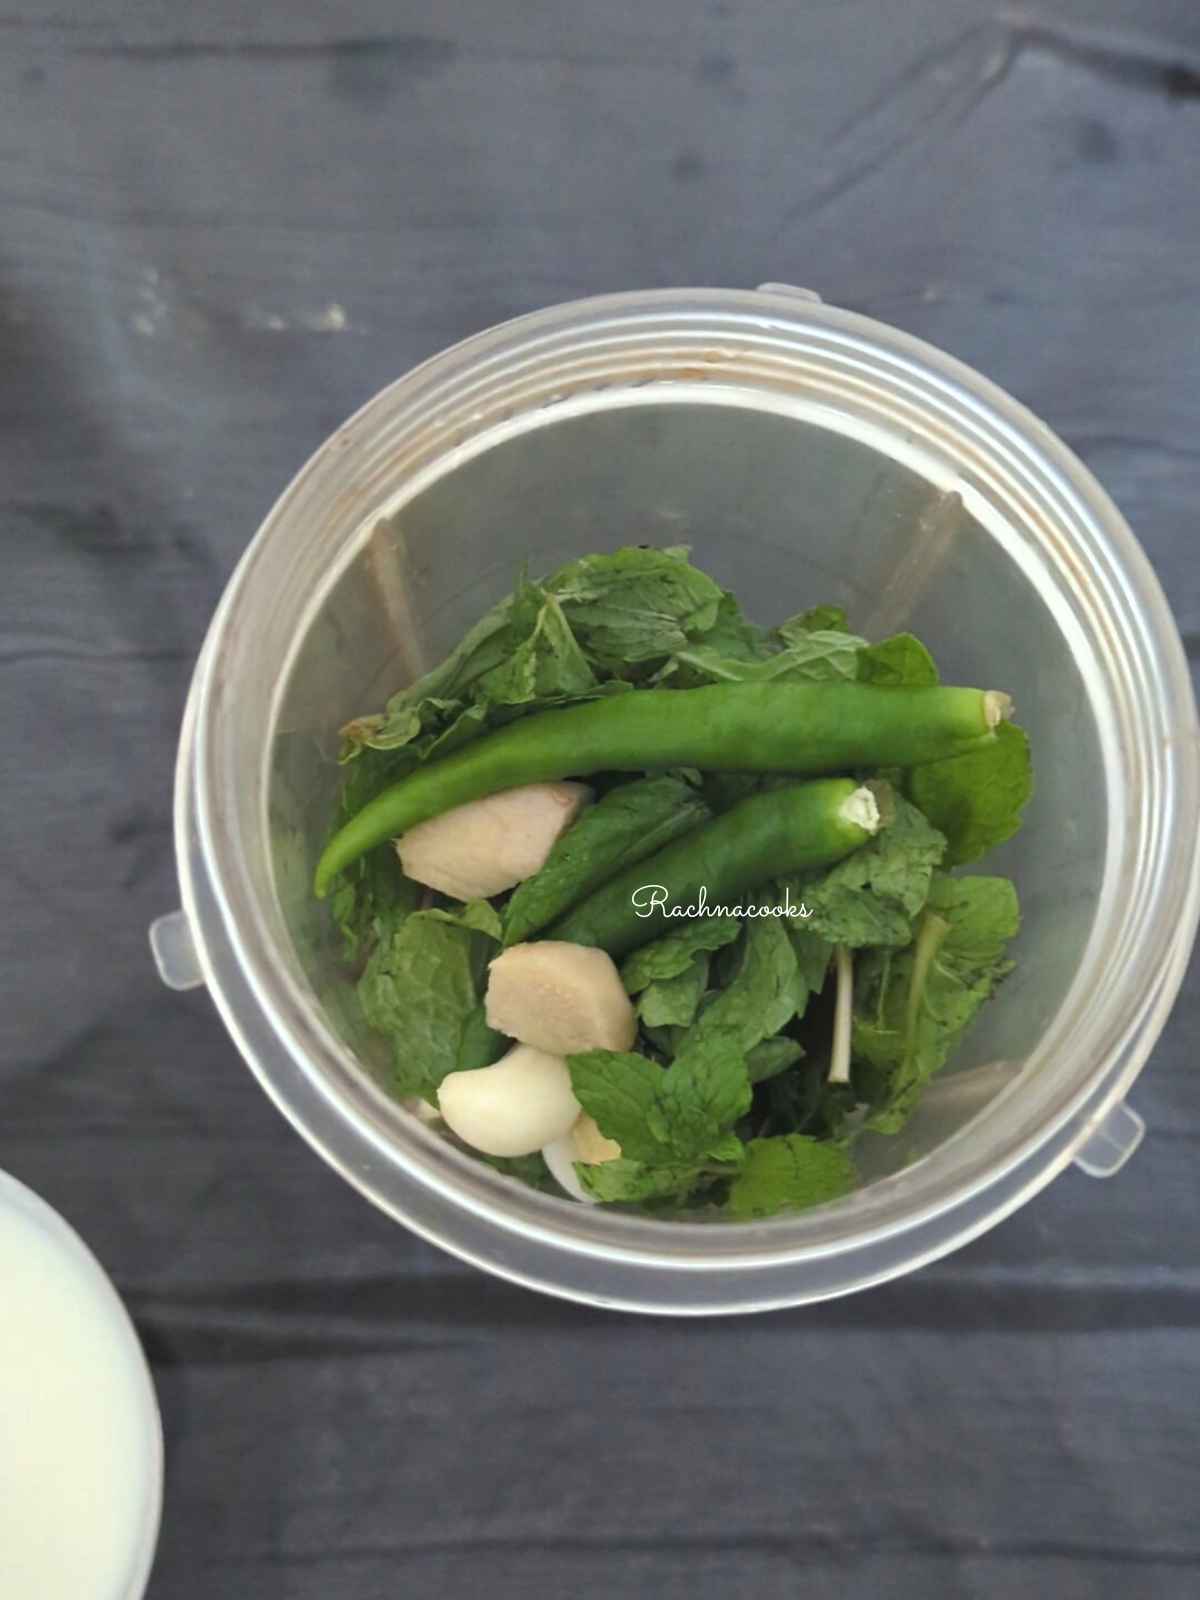 In a blender jar, mint, cilantro, ginger, garlic and green chillies are taken to blend.